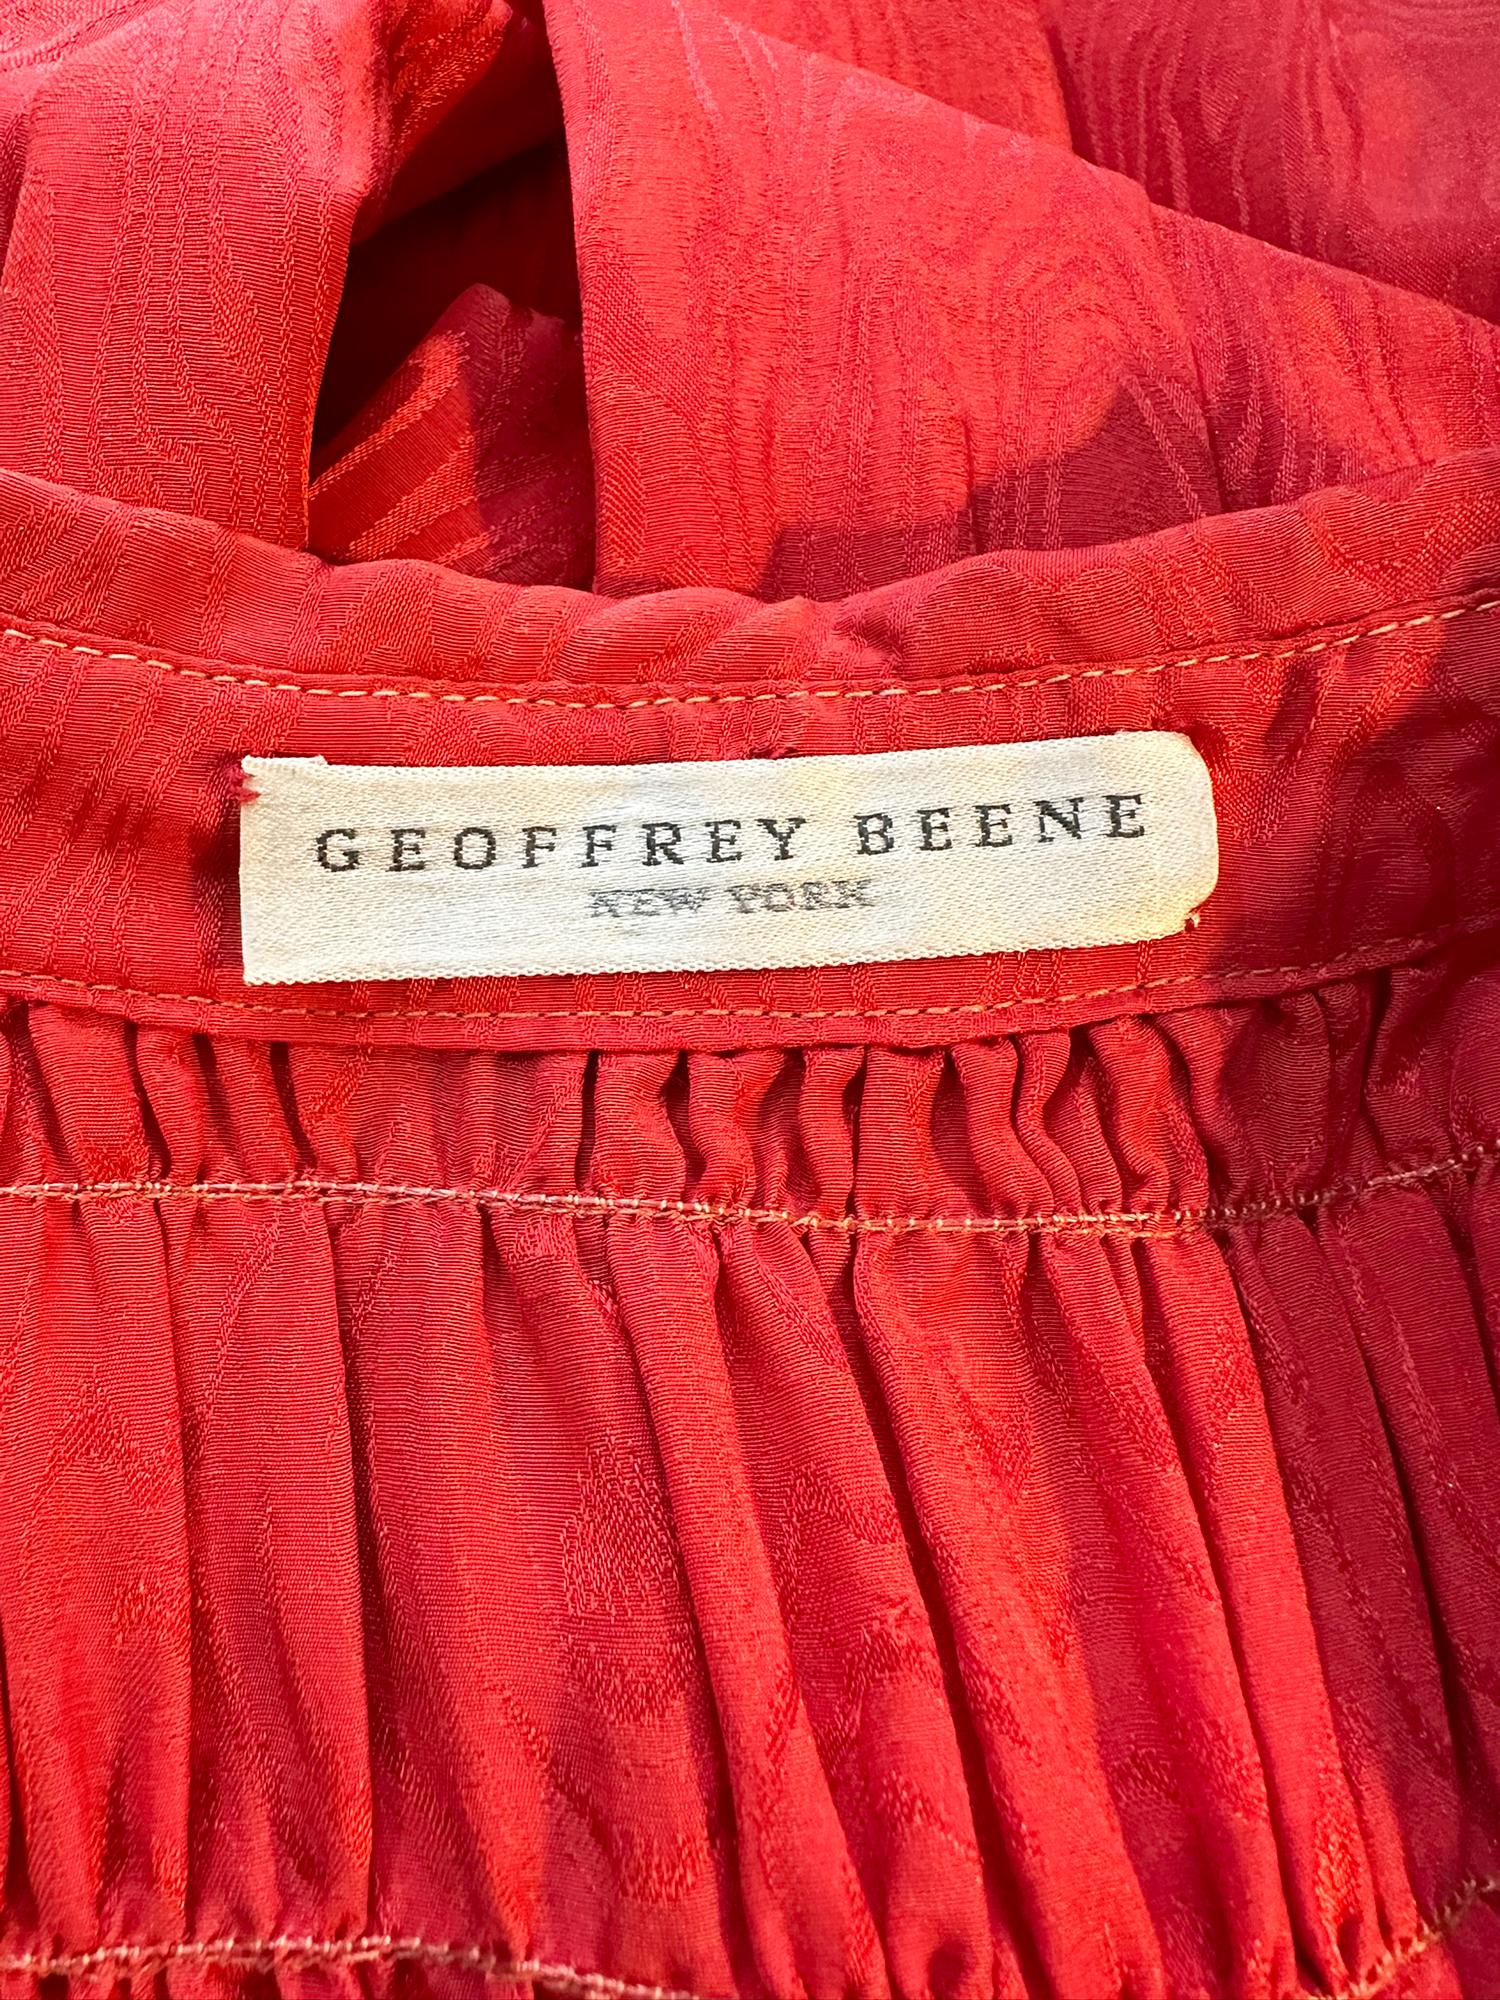 Geoffrey Beene Coral Red Silk Jacquard Smock Dress 1970s For Sale 7